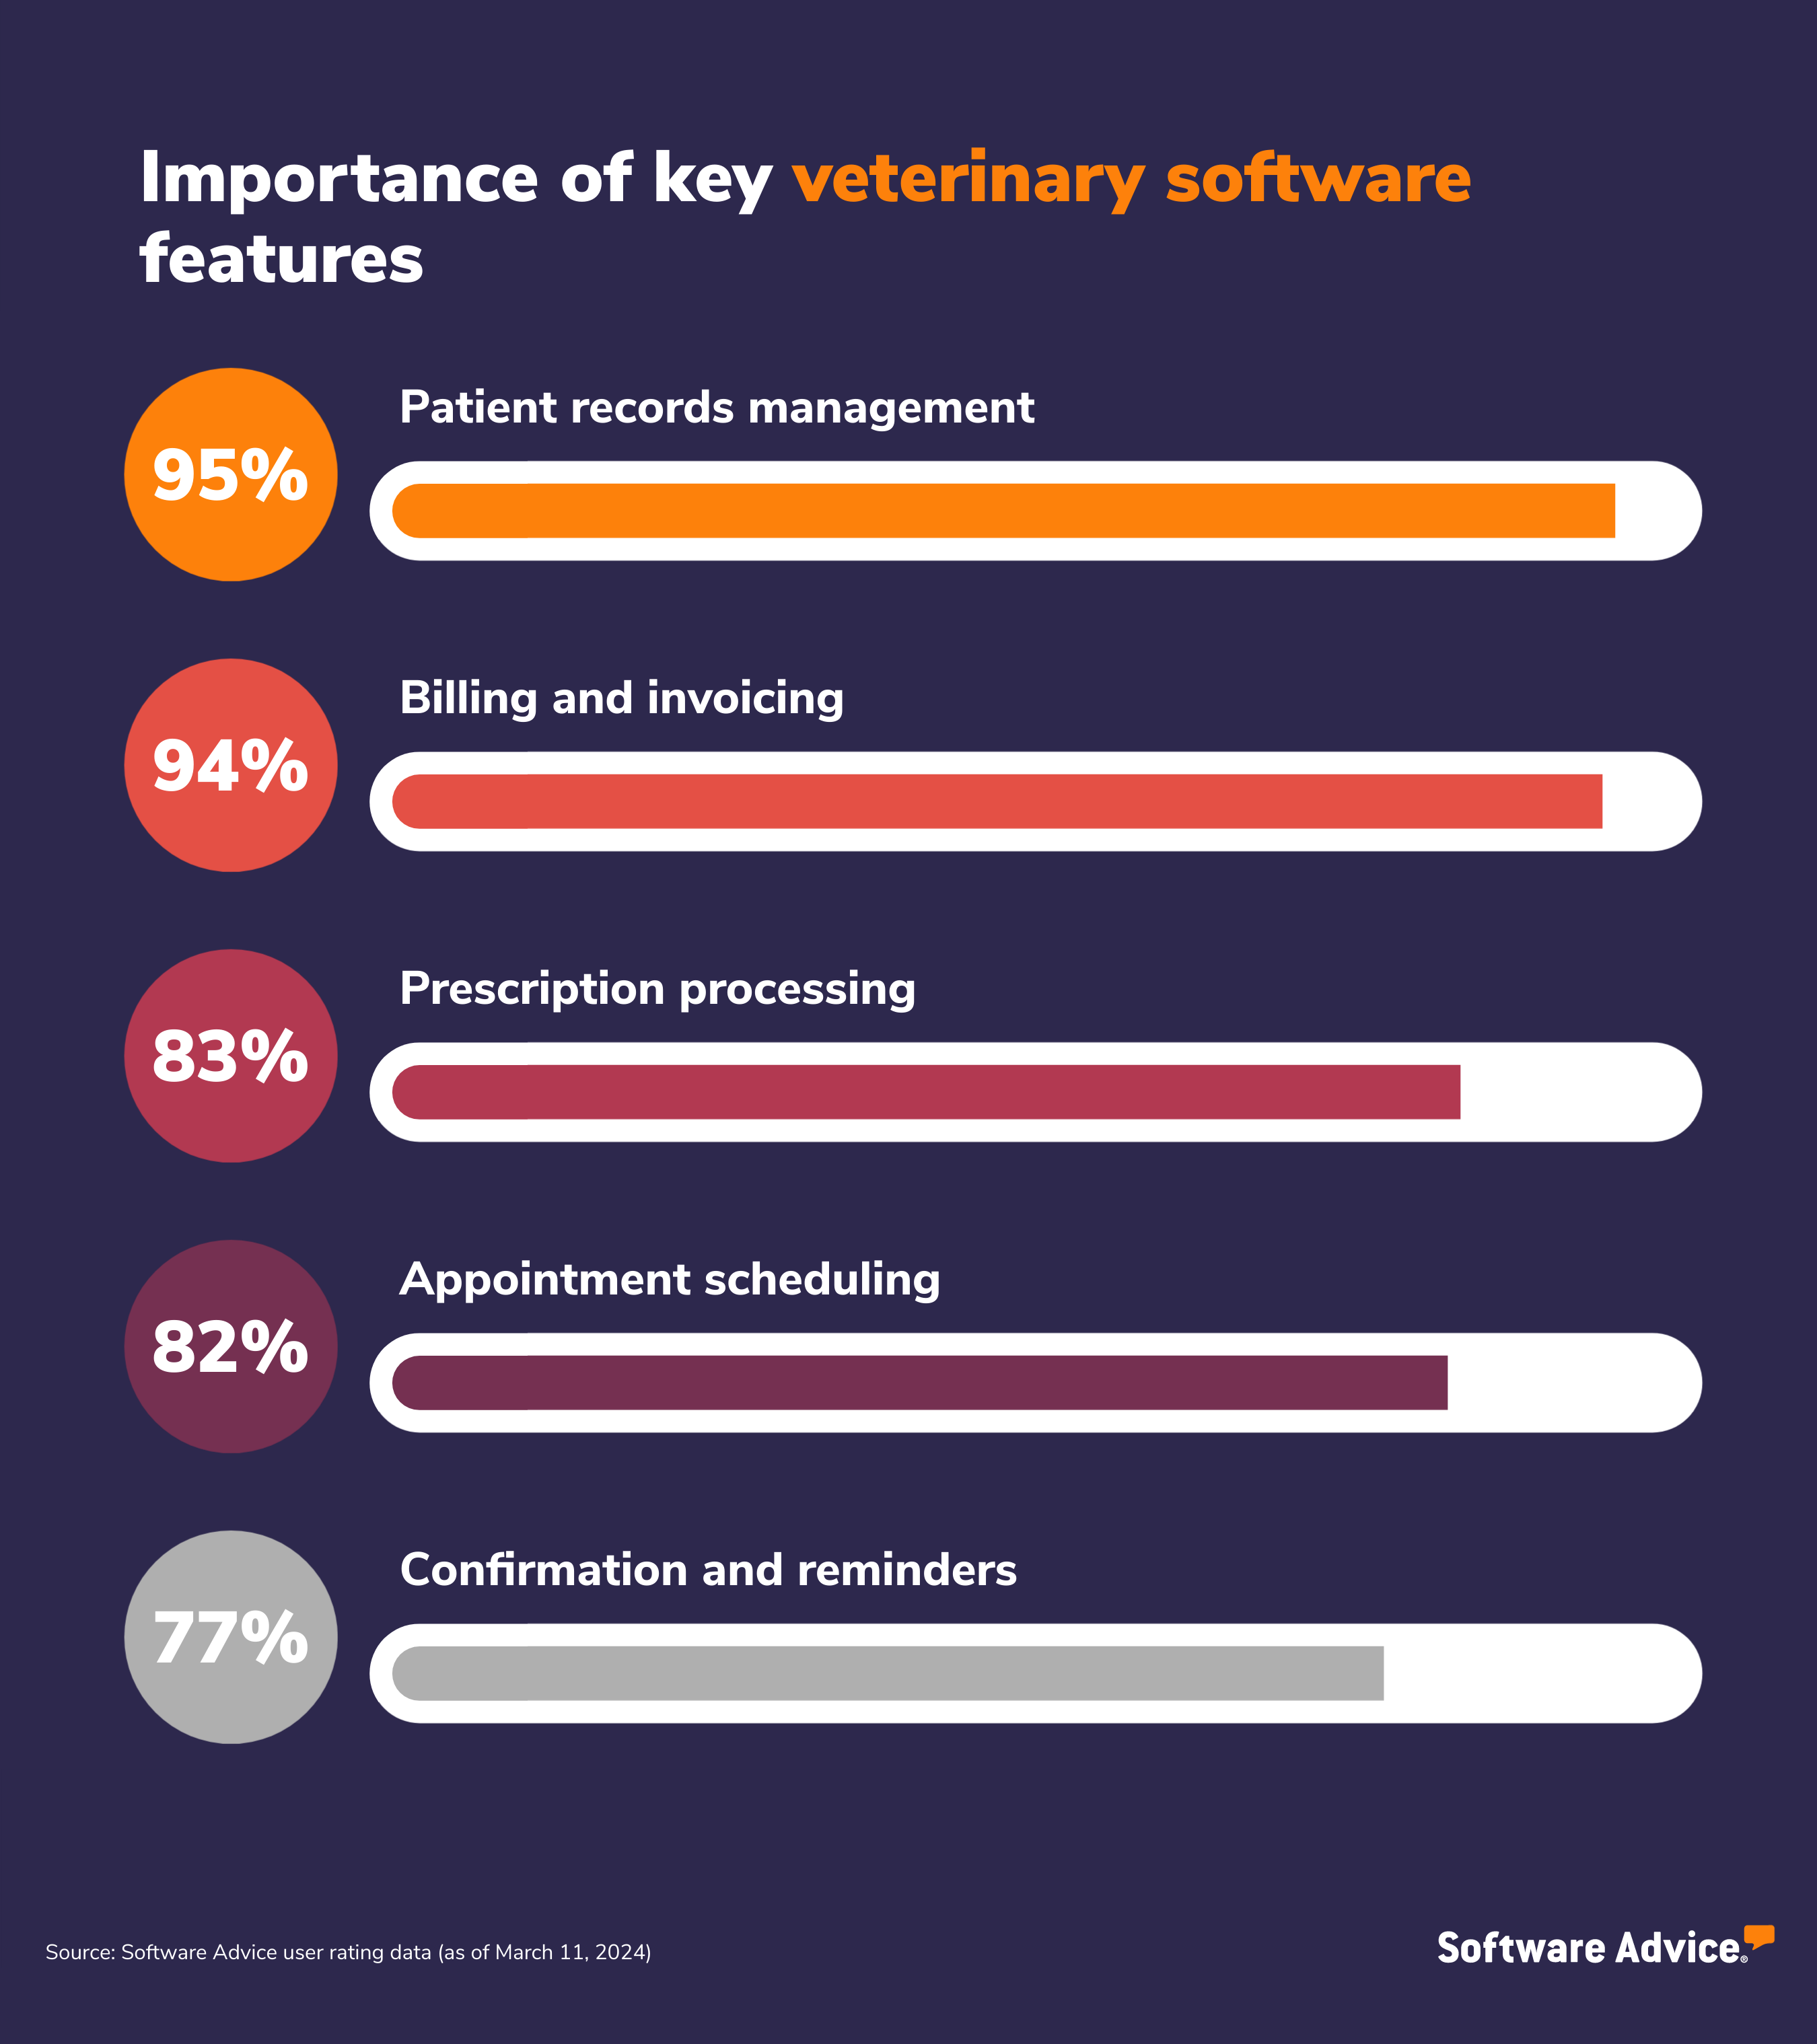 Importance of key veterinary software feature: Patient records management 95%; Billing and invoicing 94%; Prescription processing 83%; Appointment scheduling 82%; Confirmation and reminders 77%.